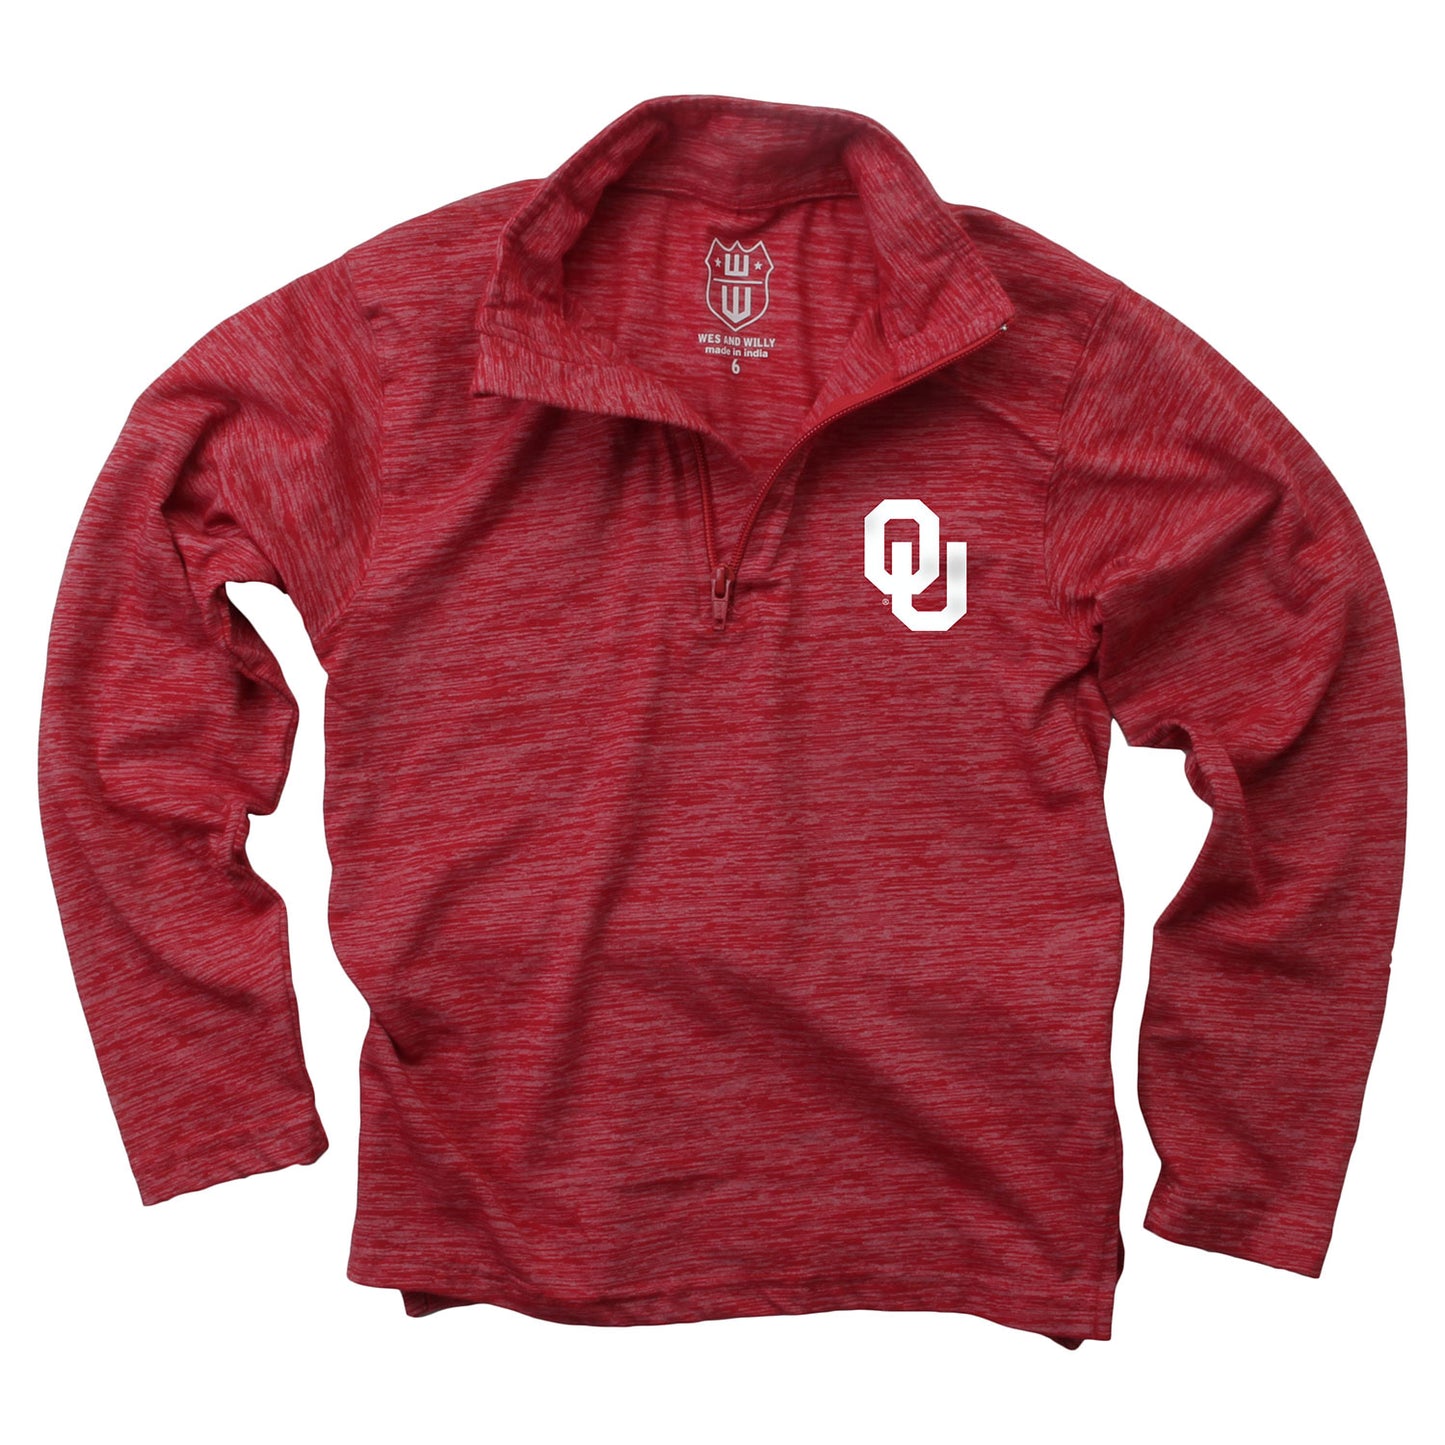 Oklahoma Sooners Wes and Willy Youth Boys Cloudy Yarn Long Sleeve College Quarter Zip